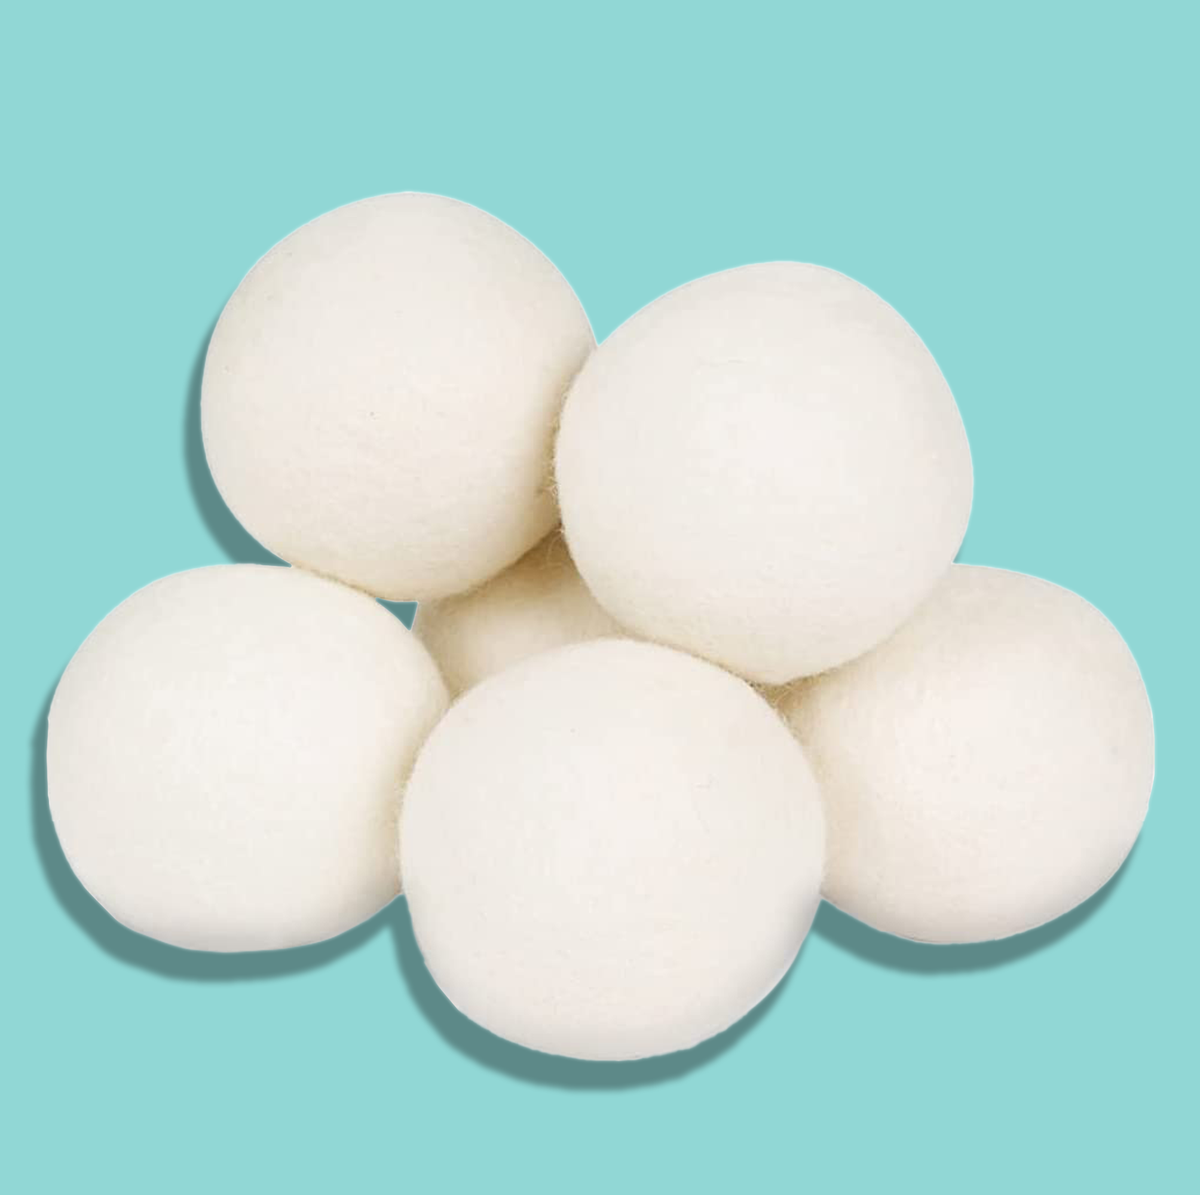 Do wool dryer balls work? Ways to use them effectively - By Oily Design